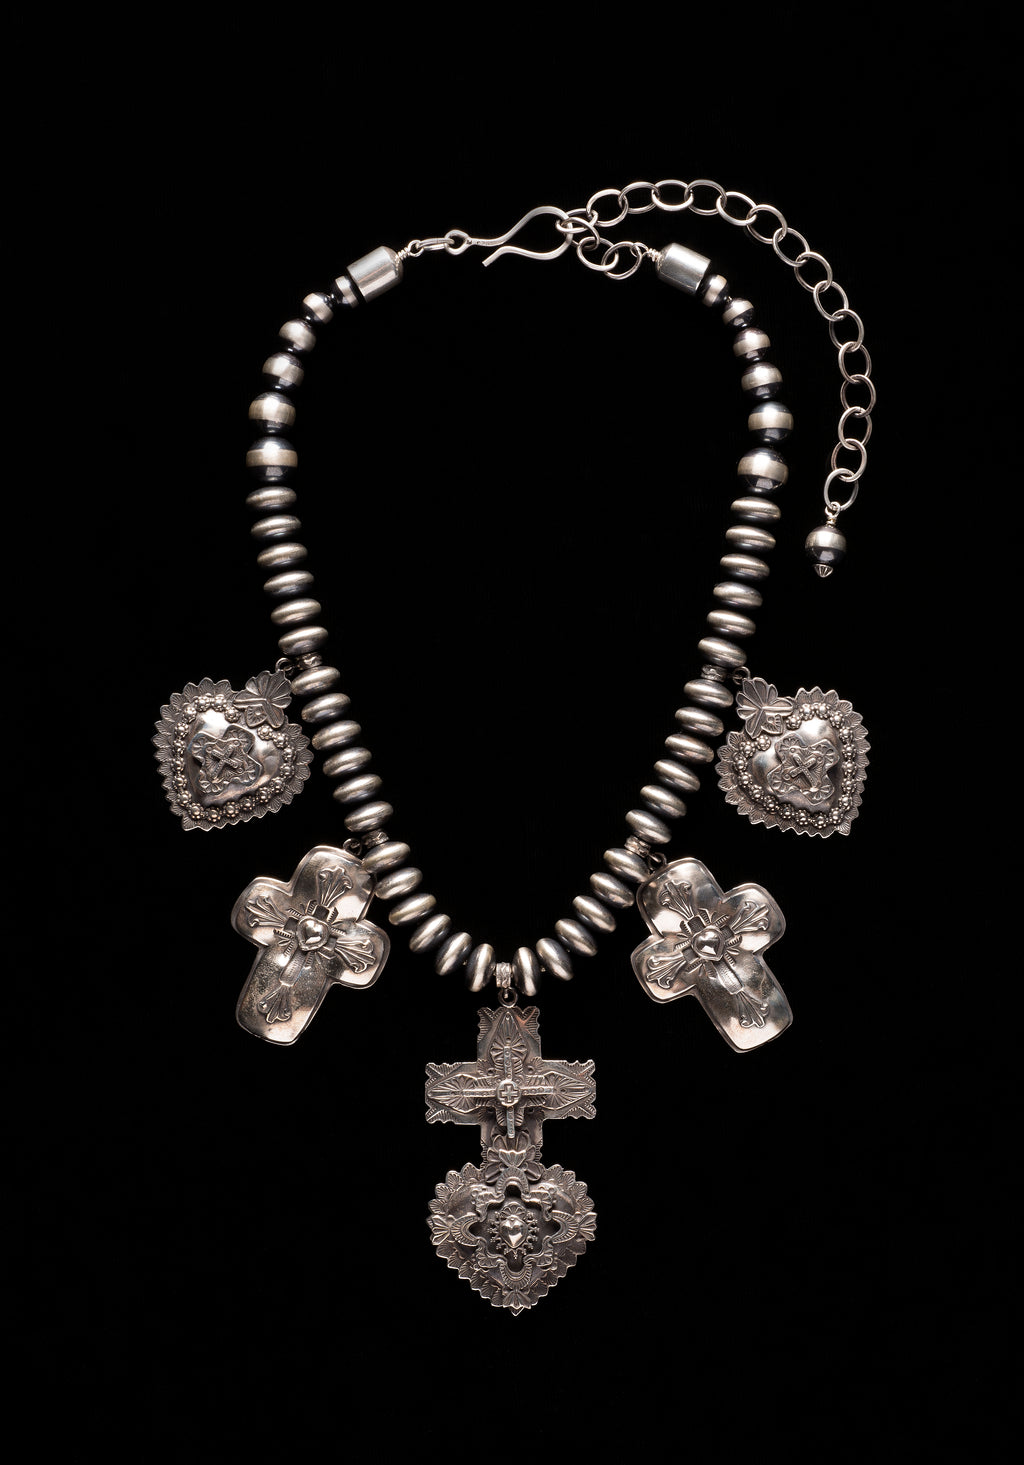 2018 Traditional Spanish Market award winning necklace My Mothers Heart by Gregory Segura Sterling silver heart and cross with Santa Fe Pearls